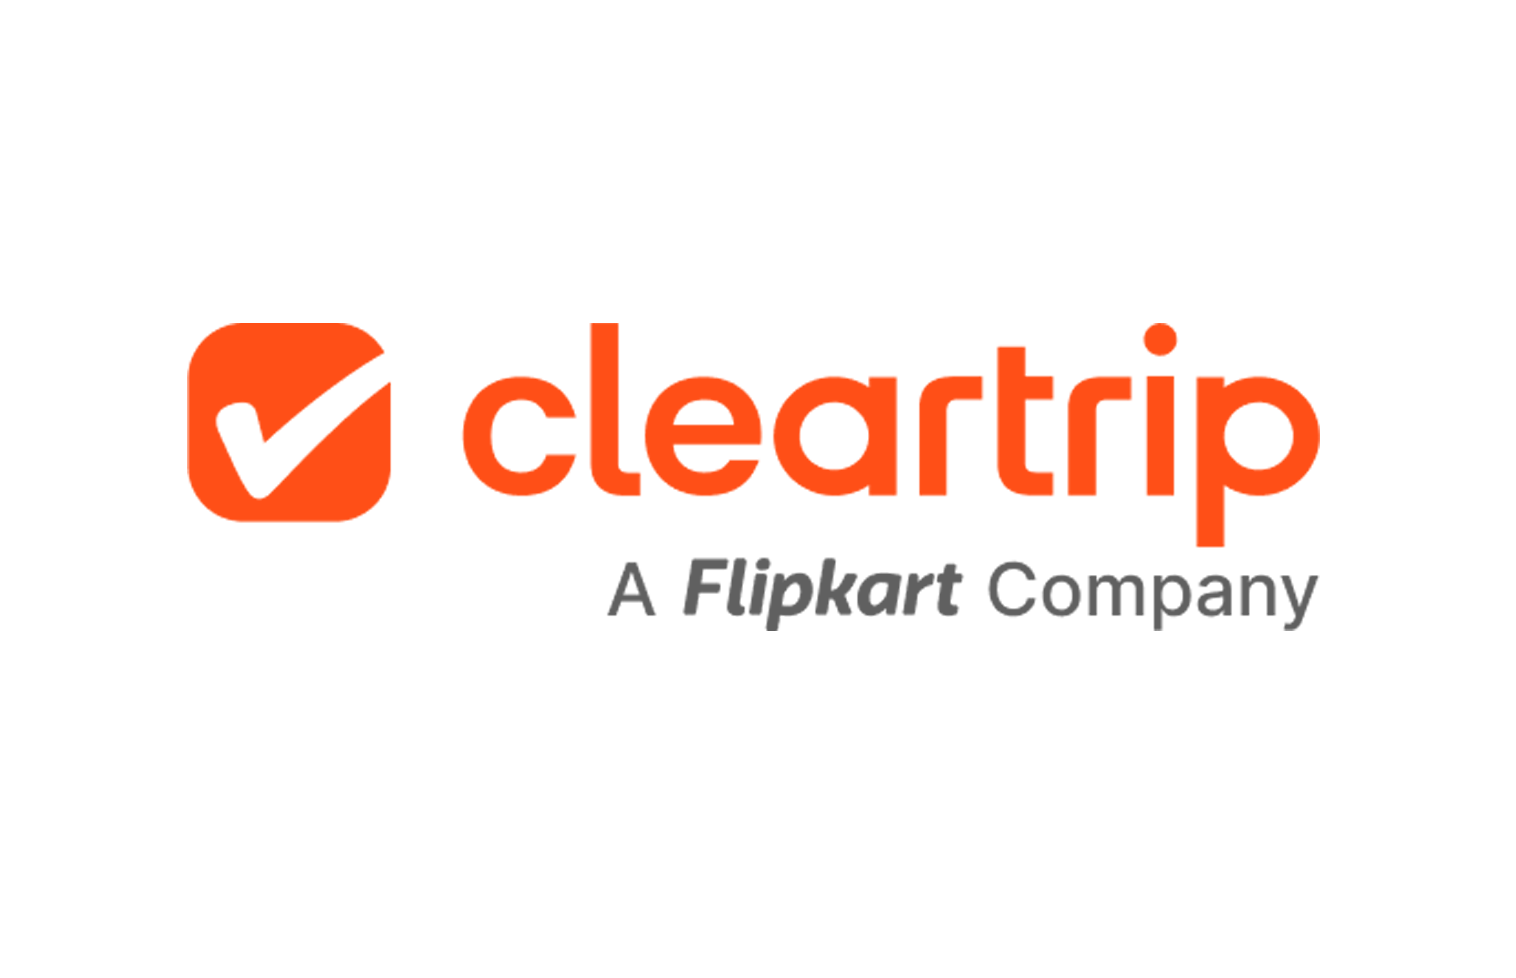 Cleartrip emerges as the second-largest OTA player in the country: VIDEC Research